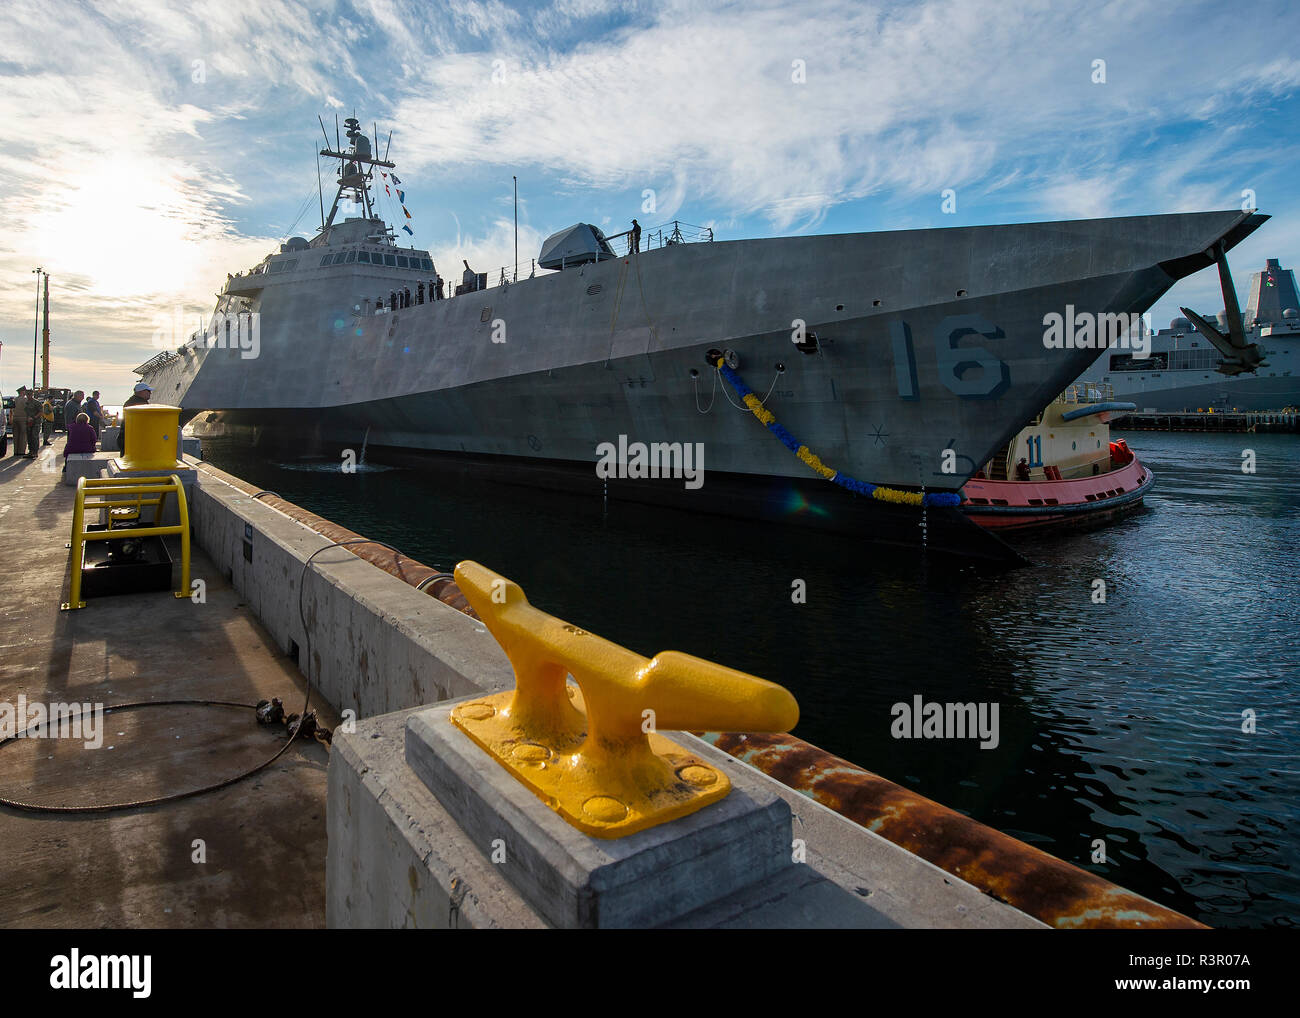 181121-N-CZ893-0575 SAN DIEGO (Nov. 21, 2018) The future USS Tulsa (LCS 16) arrives at its new homeport, Naval Base San Diego, after completing its maiden voyage from the Austal USA shipyard in Mobile, Alabama. Tulsa is the eighth ship in the littoral combat ship Independence-variant class and is scheduled for commissioning Feb. 16, 2019 in San Francisco. (U.S. Navy photo by Mass Communication Specialist 3rd Class Jason Isaacs/Released) Stock Photo